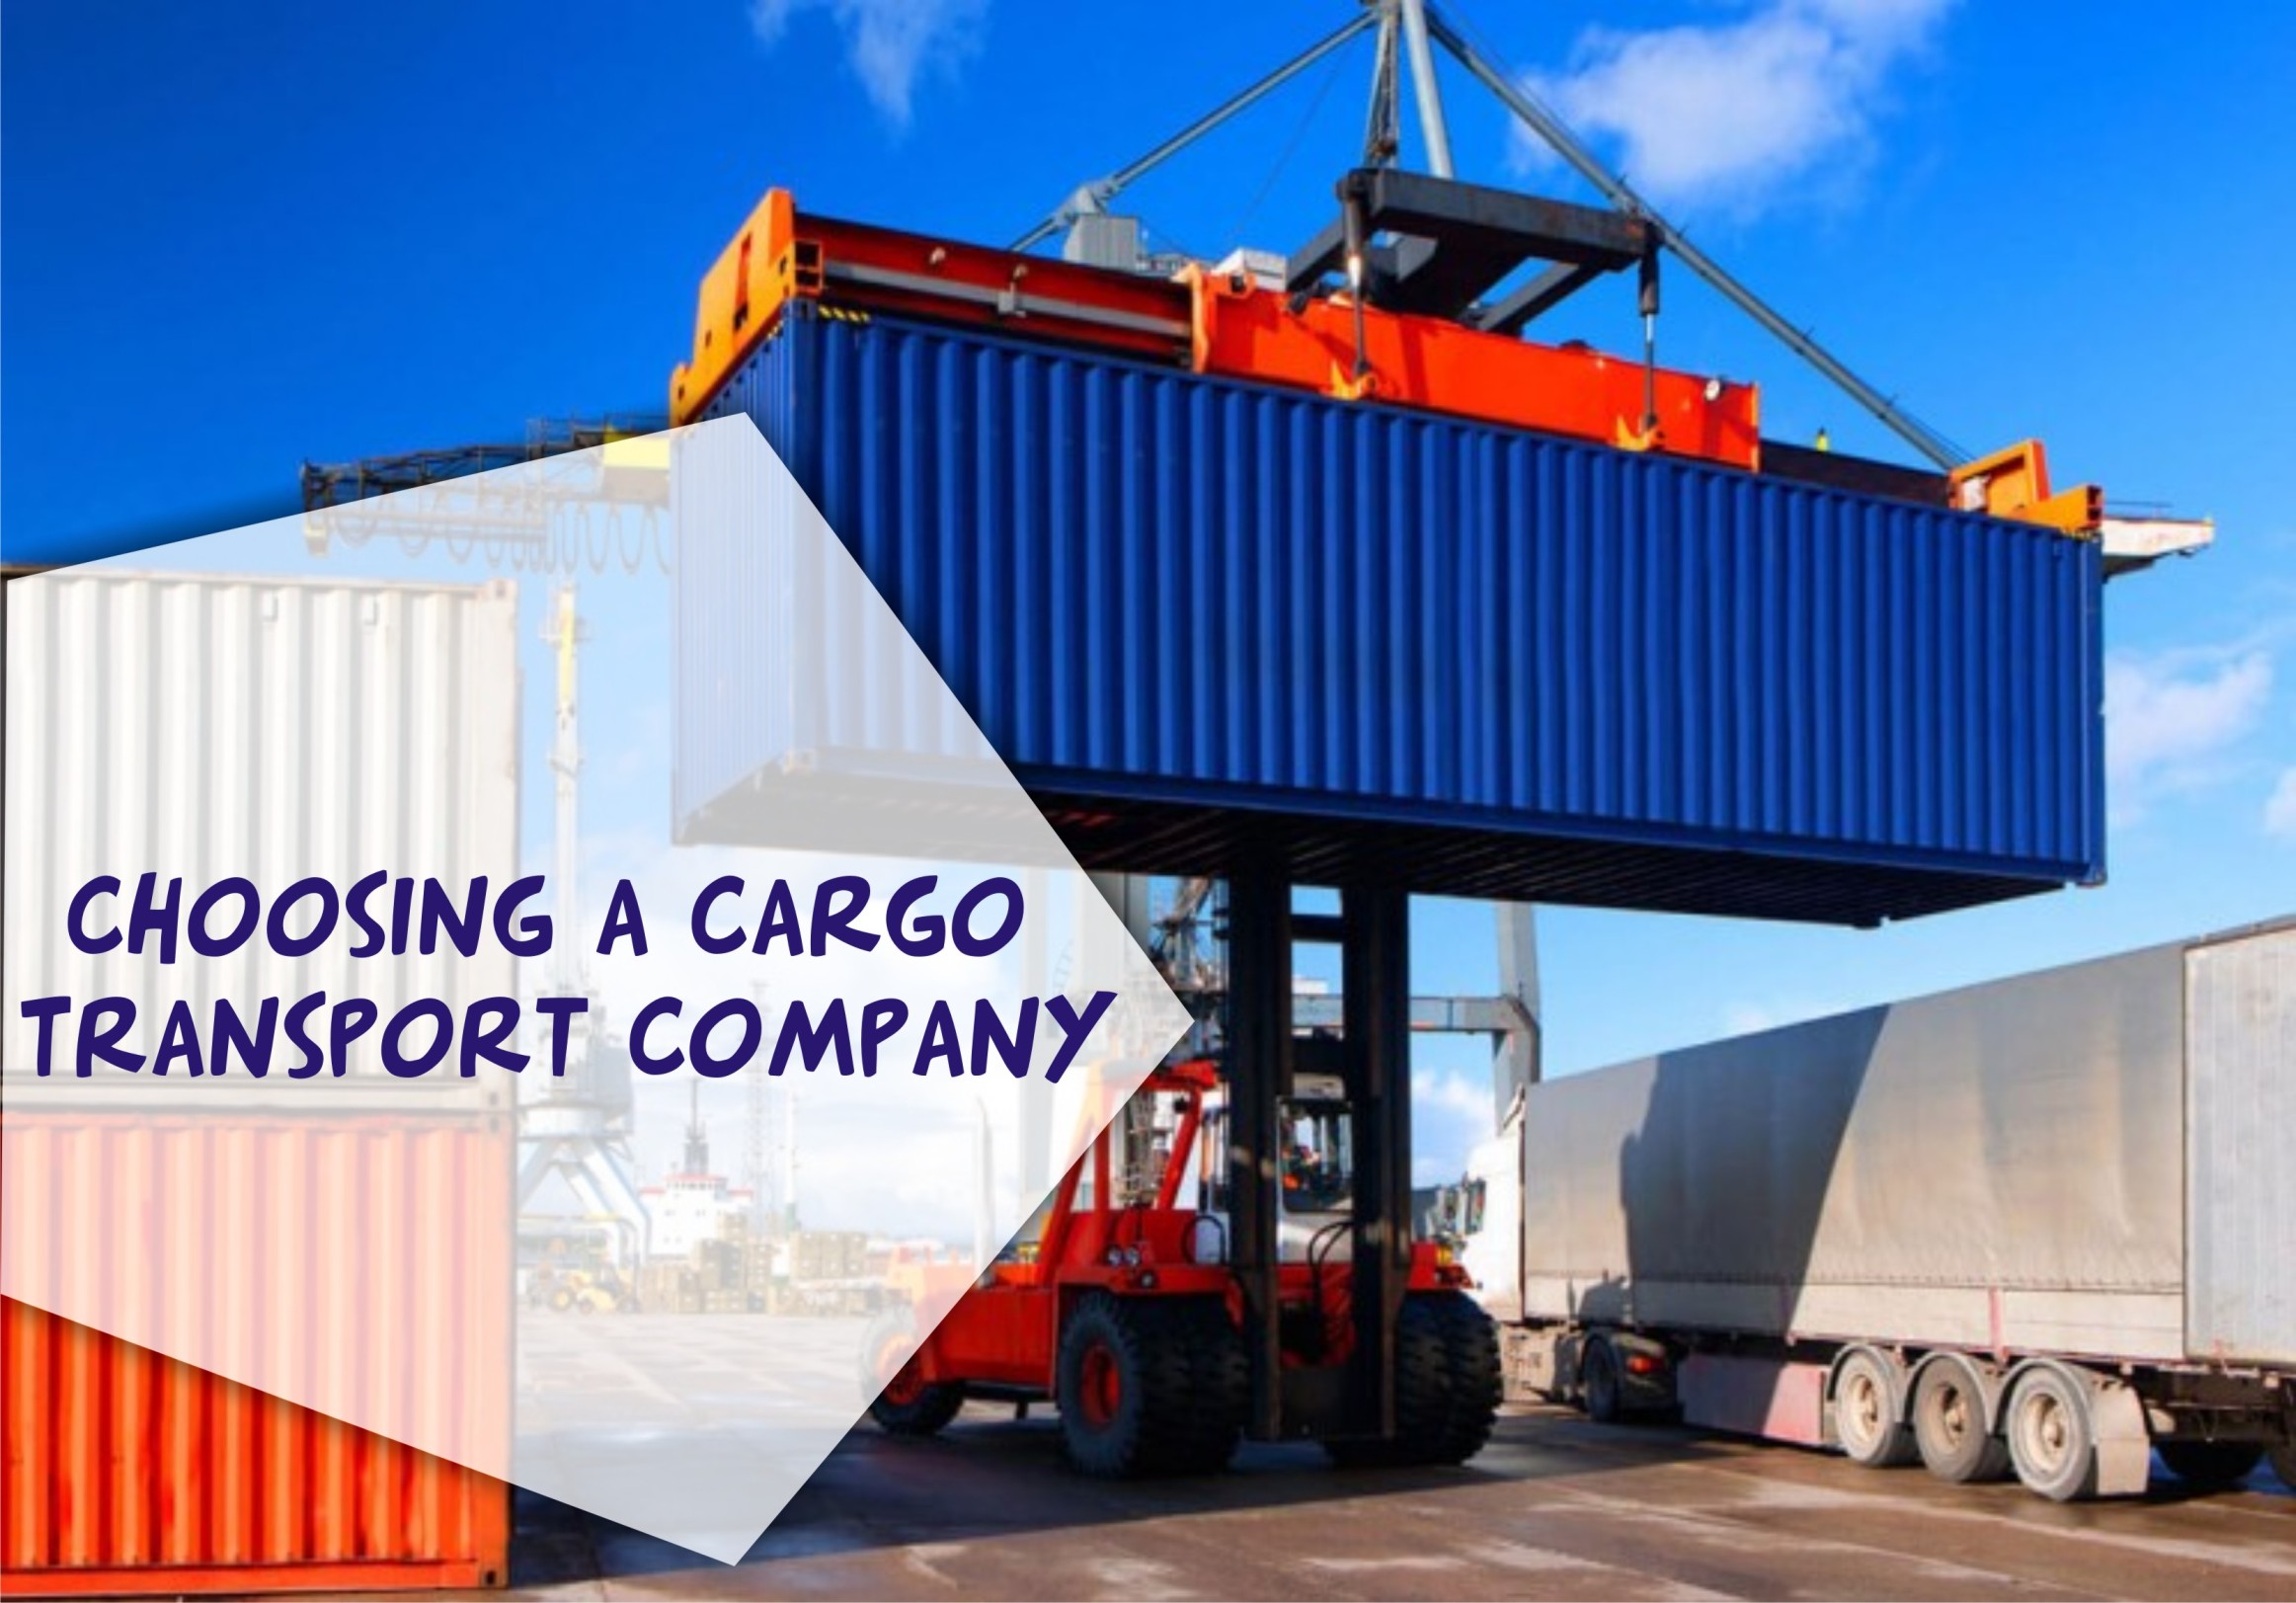 Tips on how to choose cargo transport company